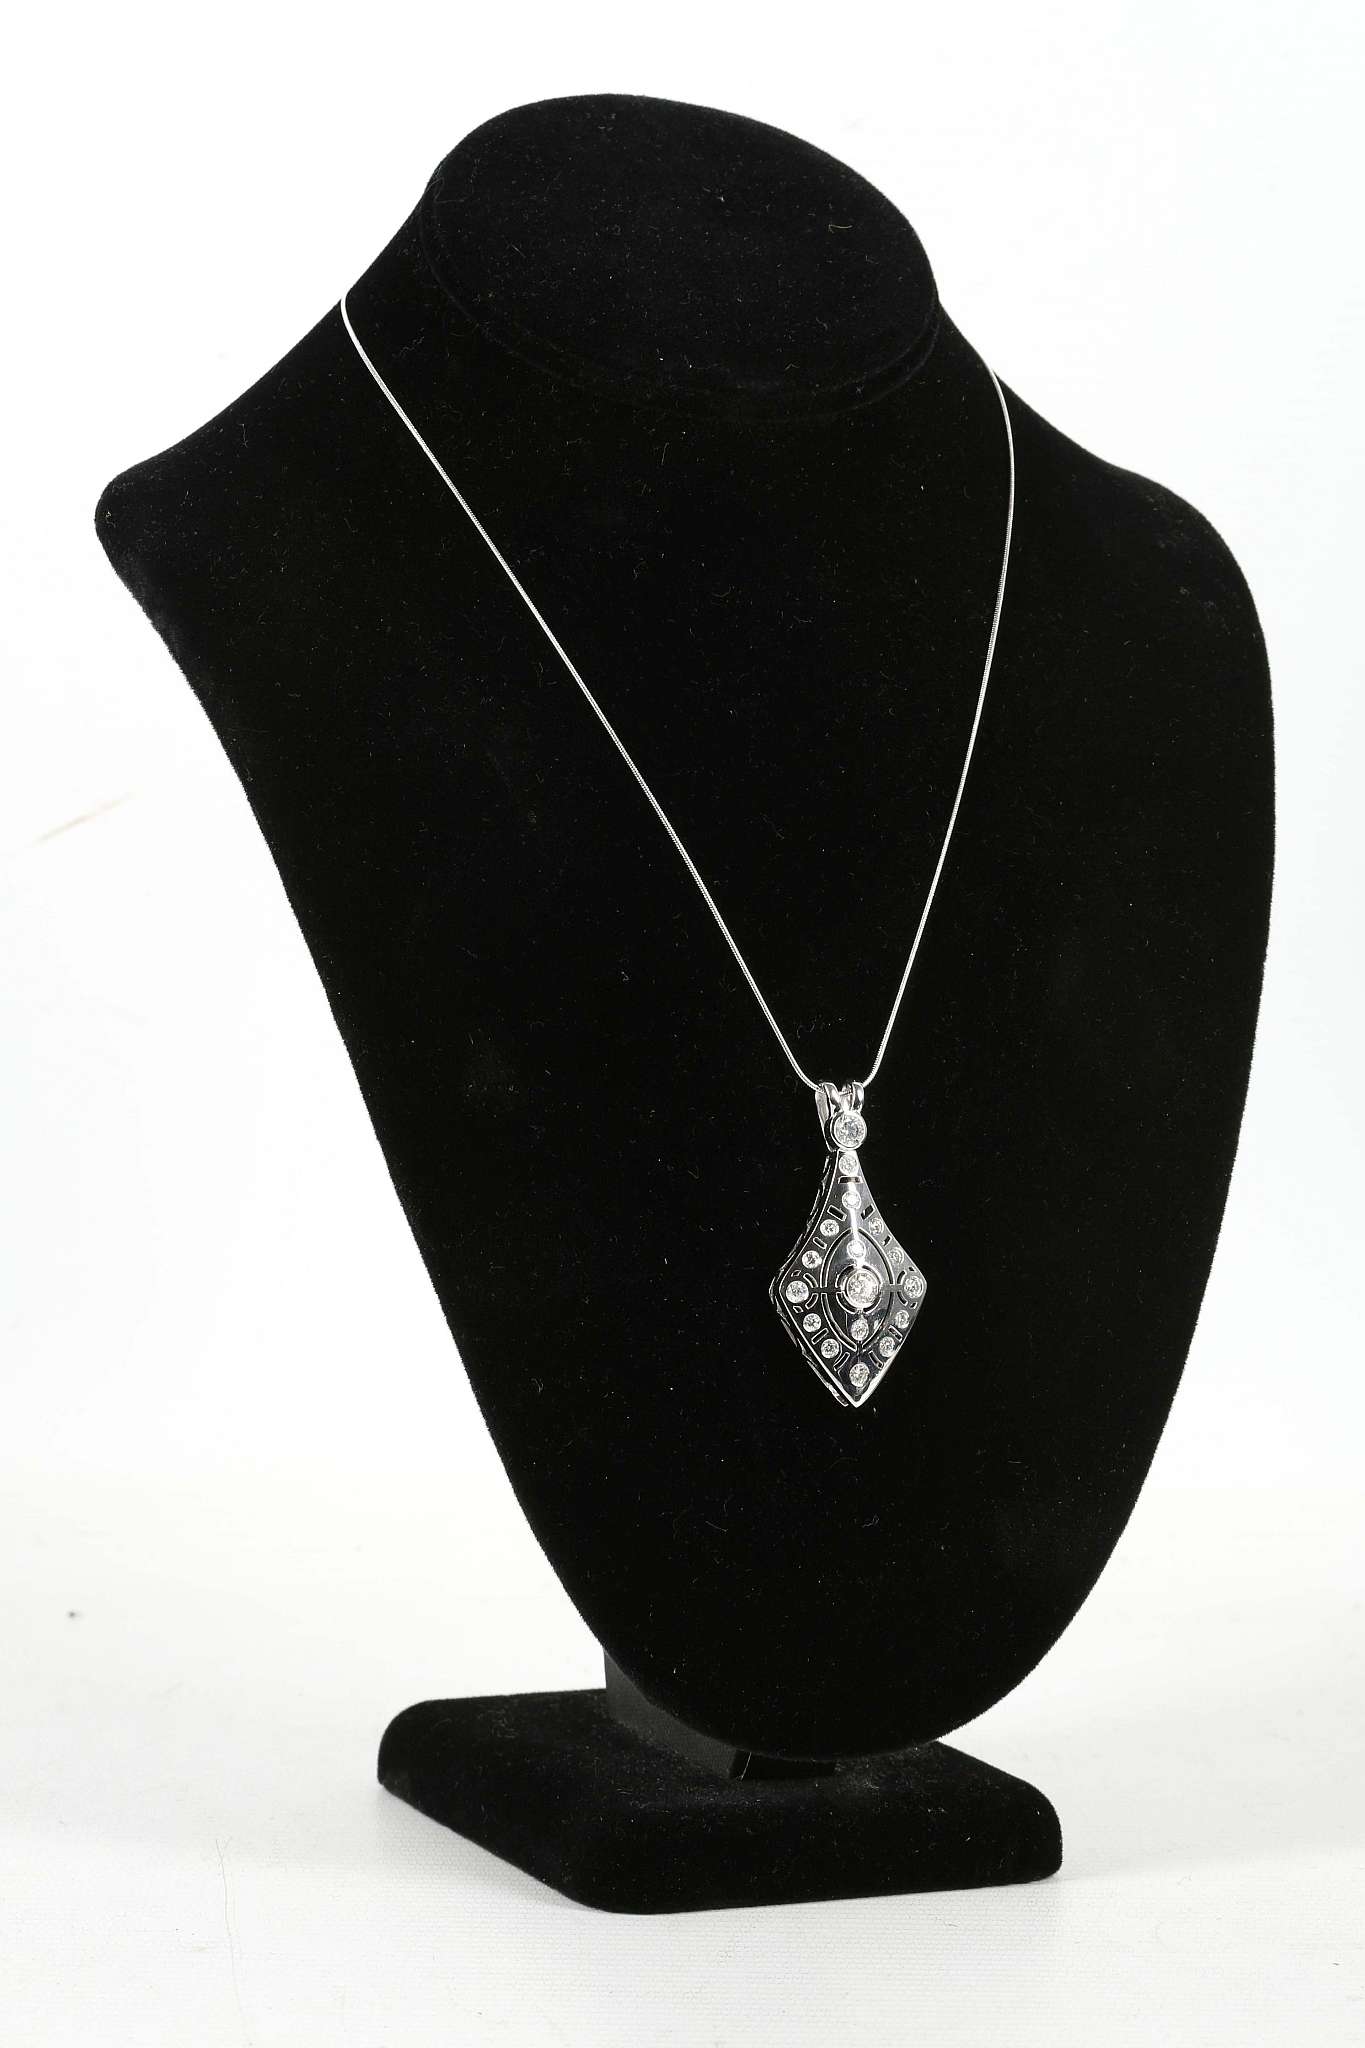 An 18ct white gold, large Art Deco style, pendant 1.96ct, on 18ct white gold snake chain - Image 2 of 3